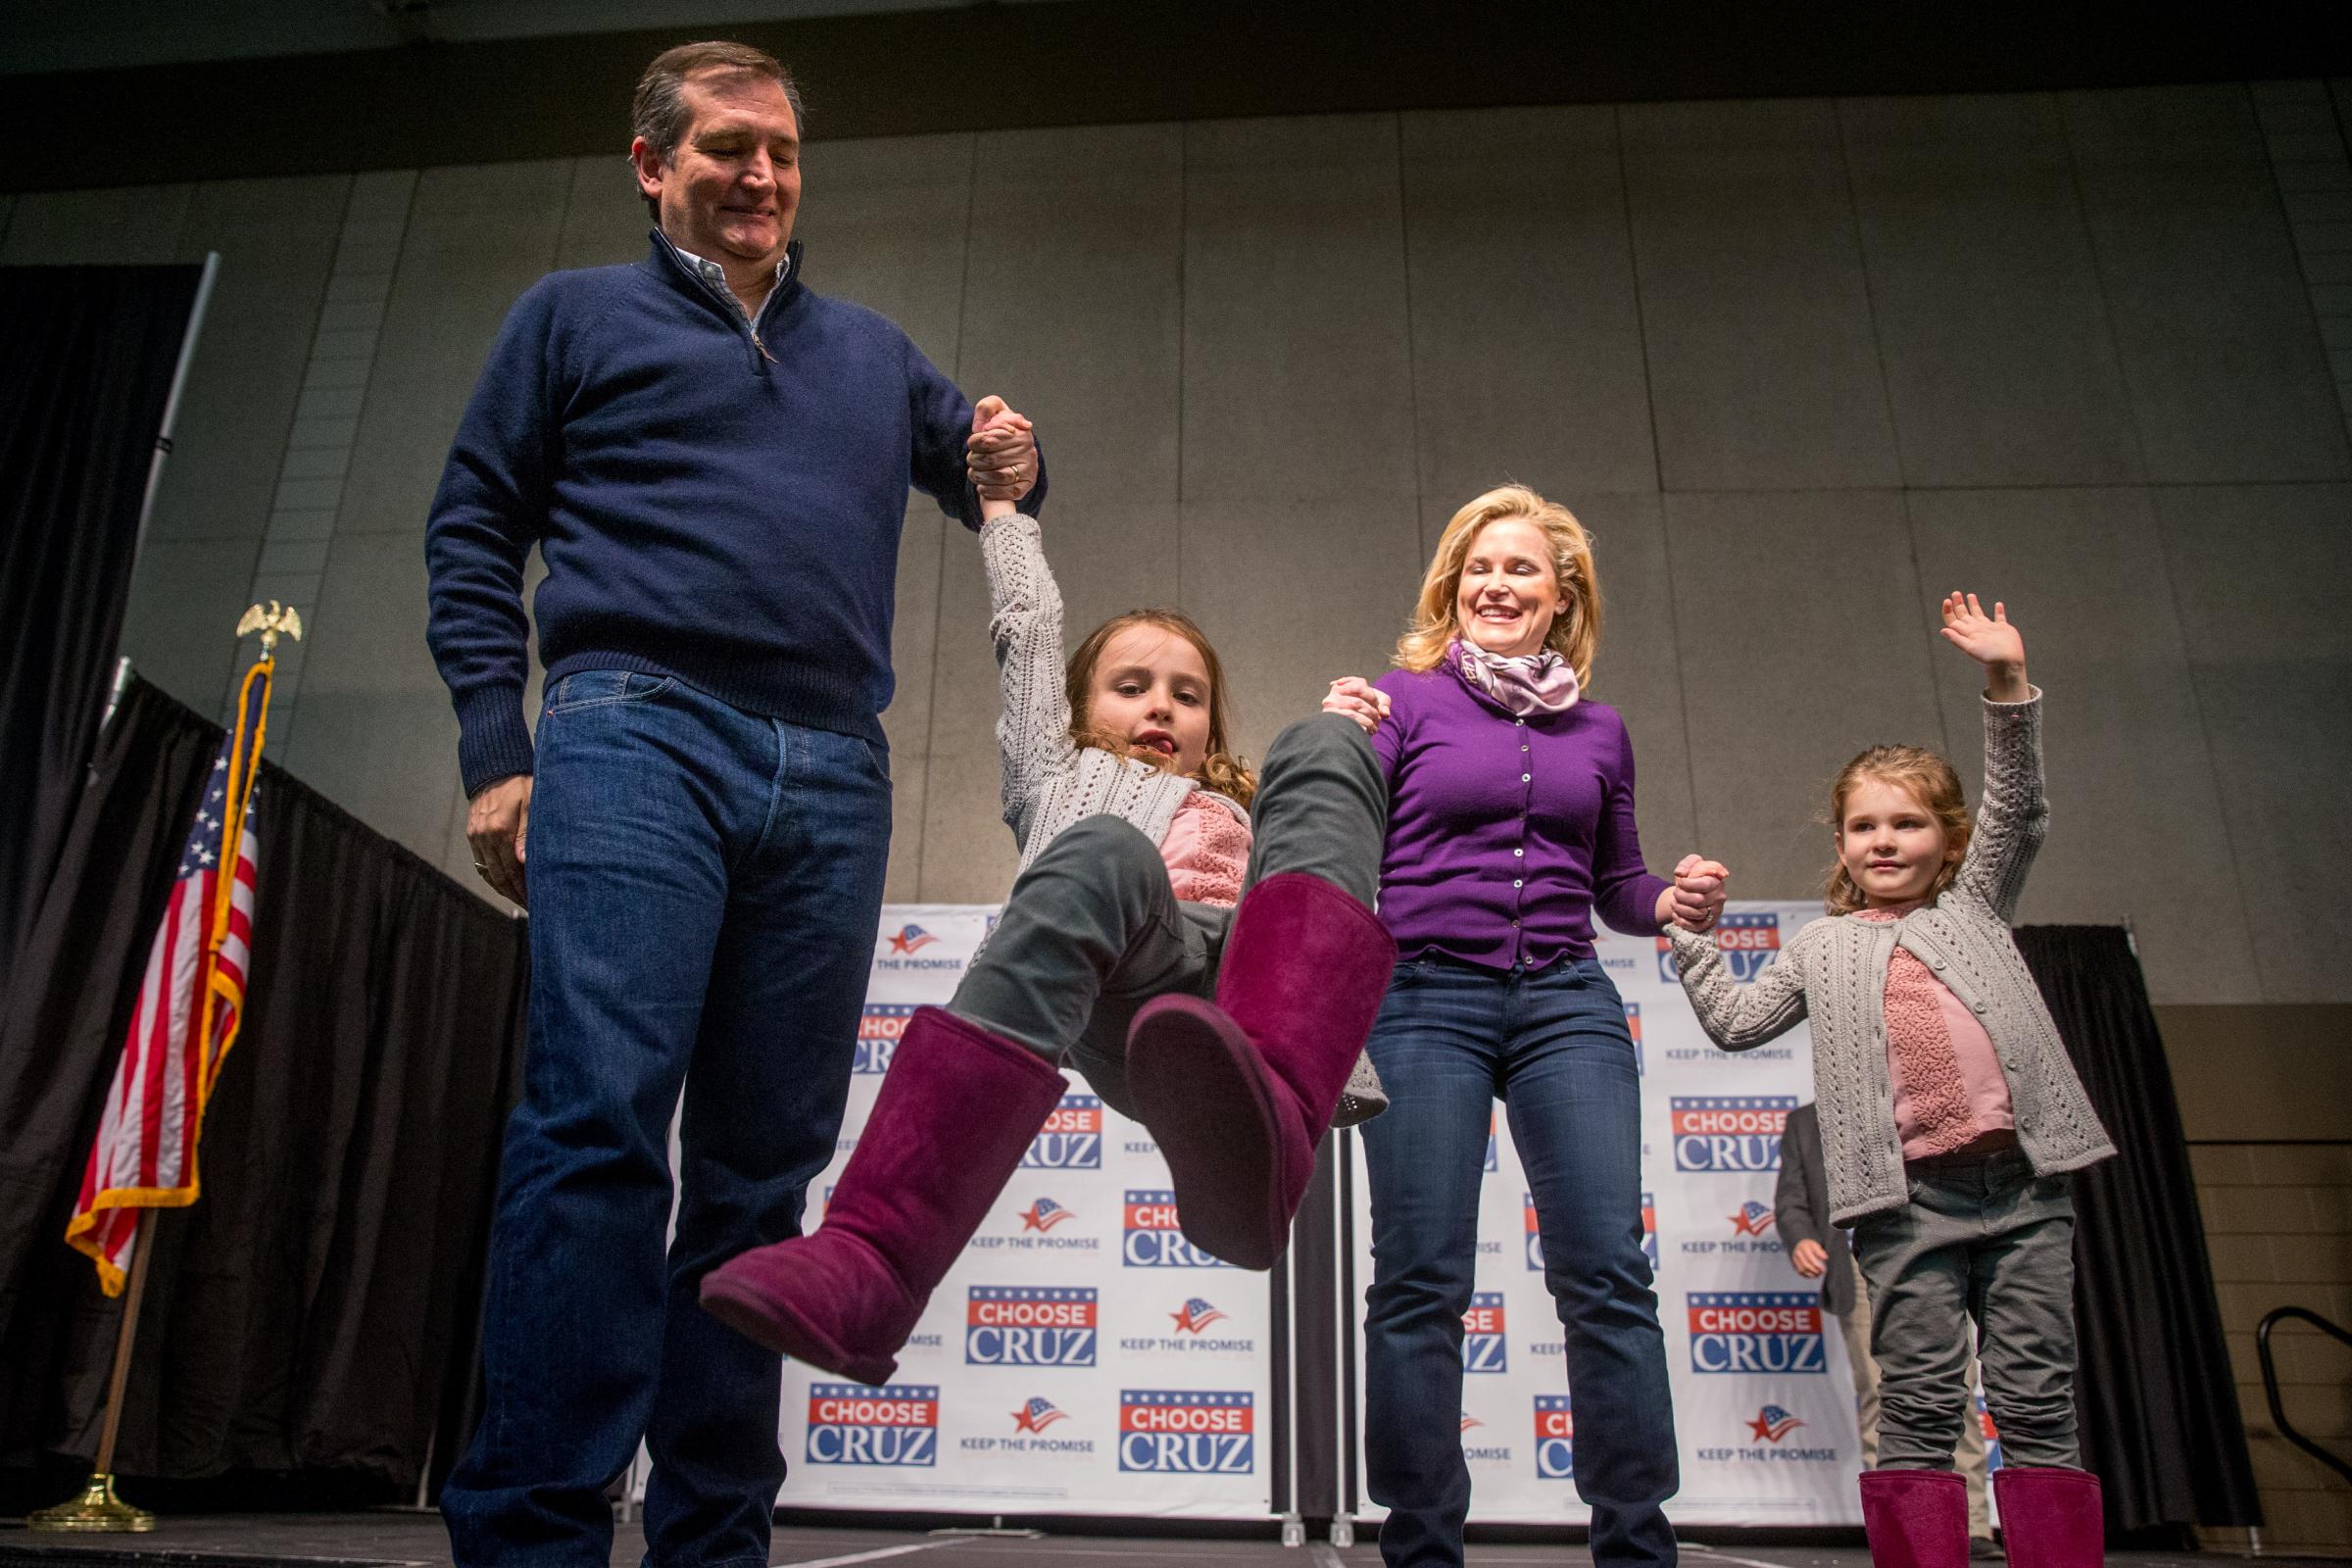 Republican presidential candidate ,Texas Sen. Ted Cruz and his wife Heidi swing their daughter Caroline, 7, as their daughter Catherine, 4, waves at a rally in Waterloo, Iowa, on Jan. 23, 2016